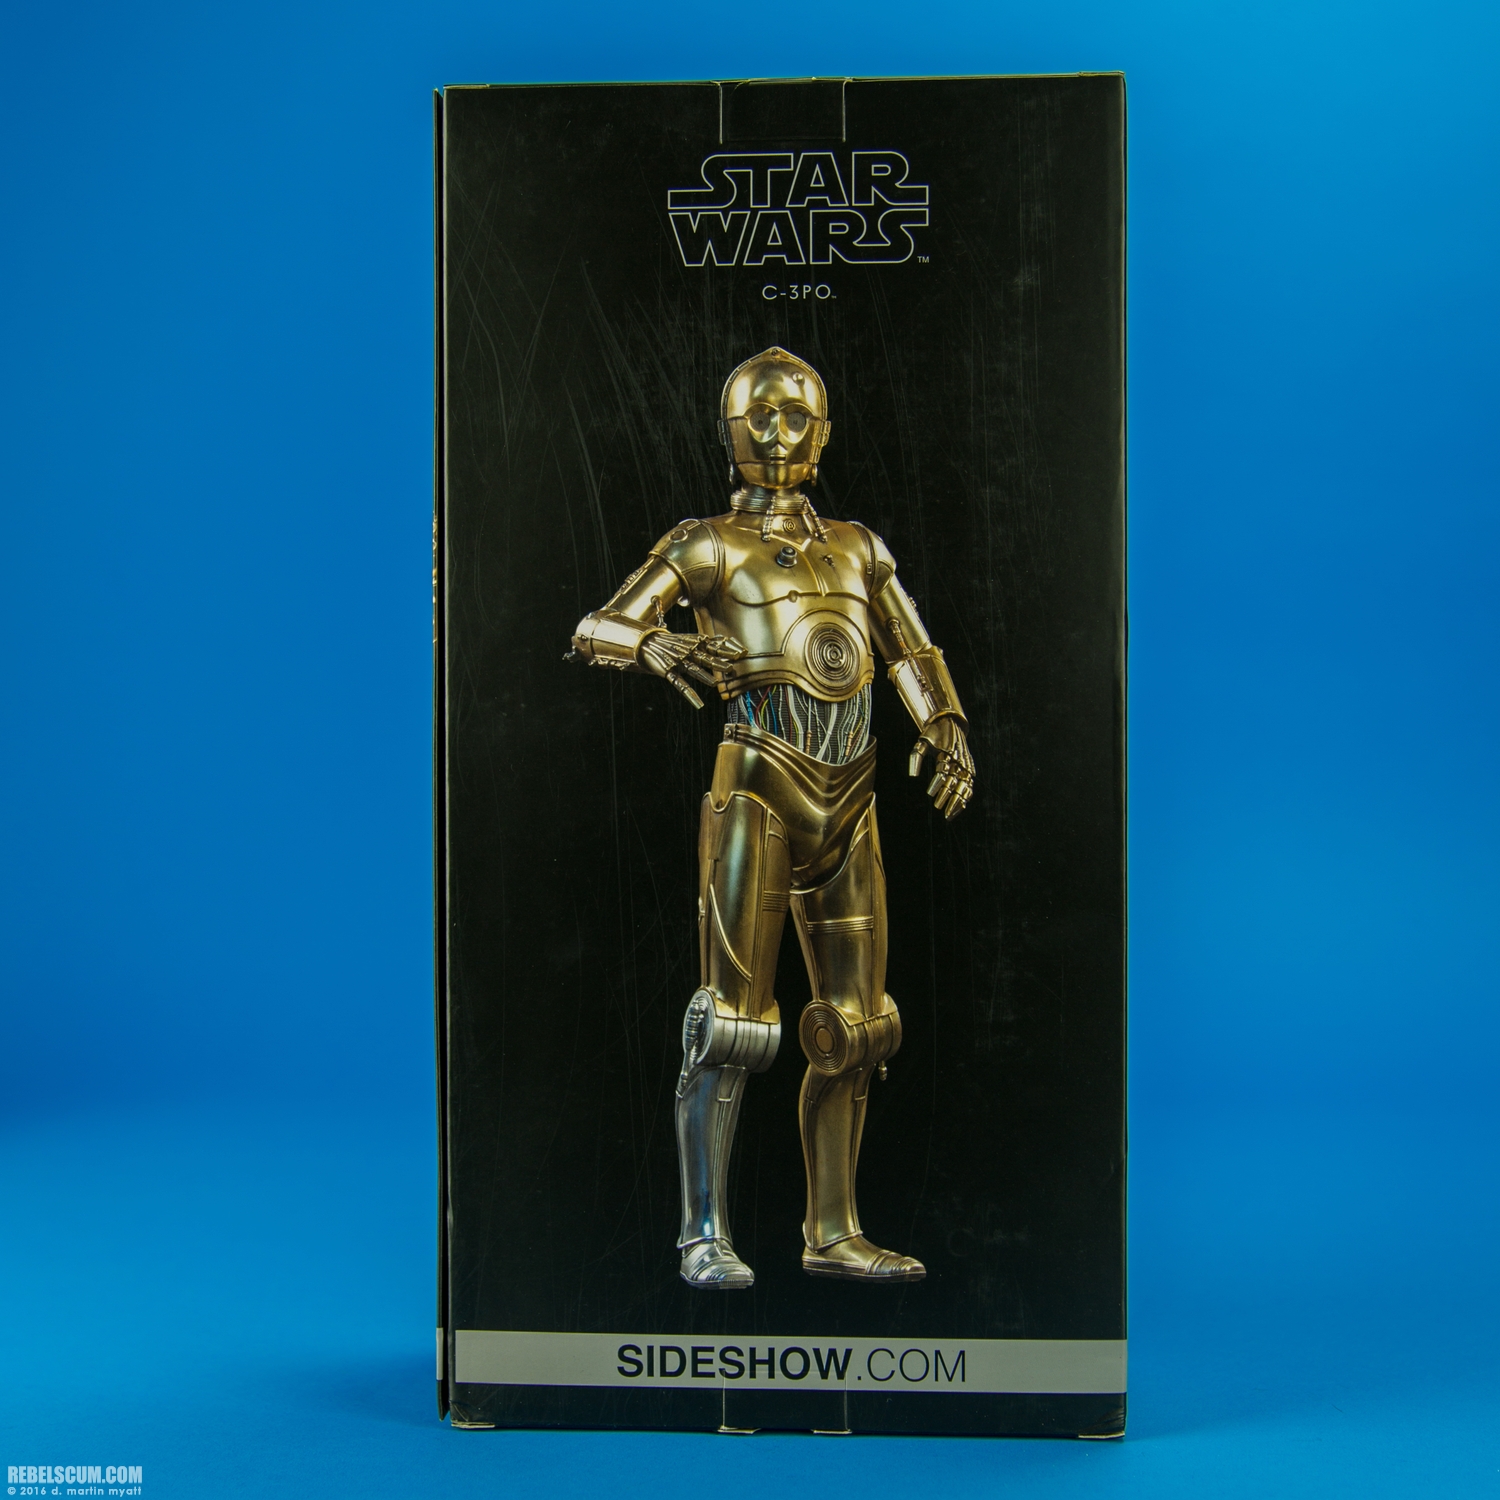 C-3PO-Sixth-Scale-Figure-Sideshow-Collectibles-026.jpg